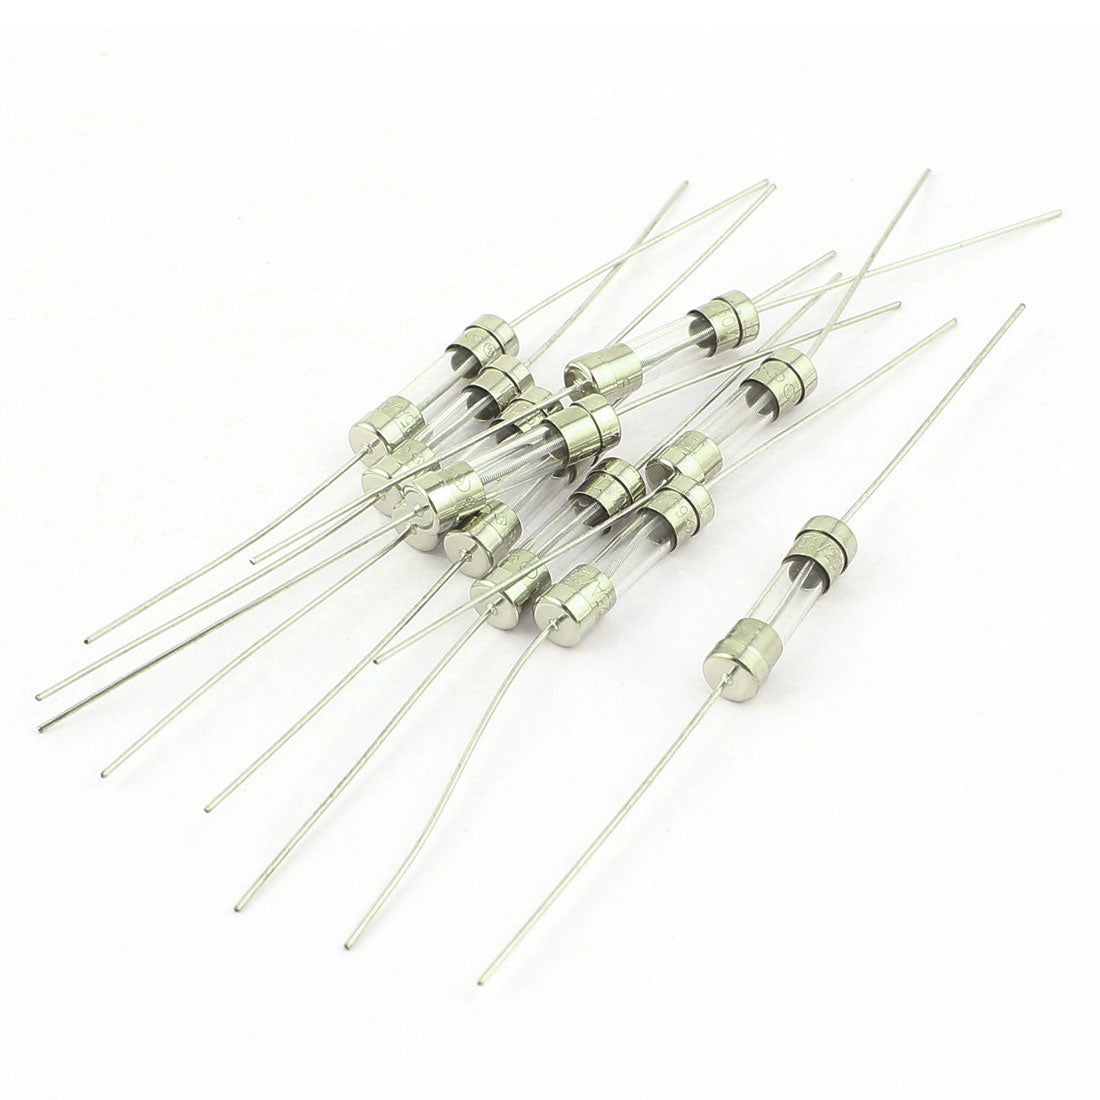 uxcell Uxcell Electrical Dual Cap Axial Leaded Glass Tube Fuses 5 x 20mm 250V 1.25A 10pcs